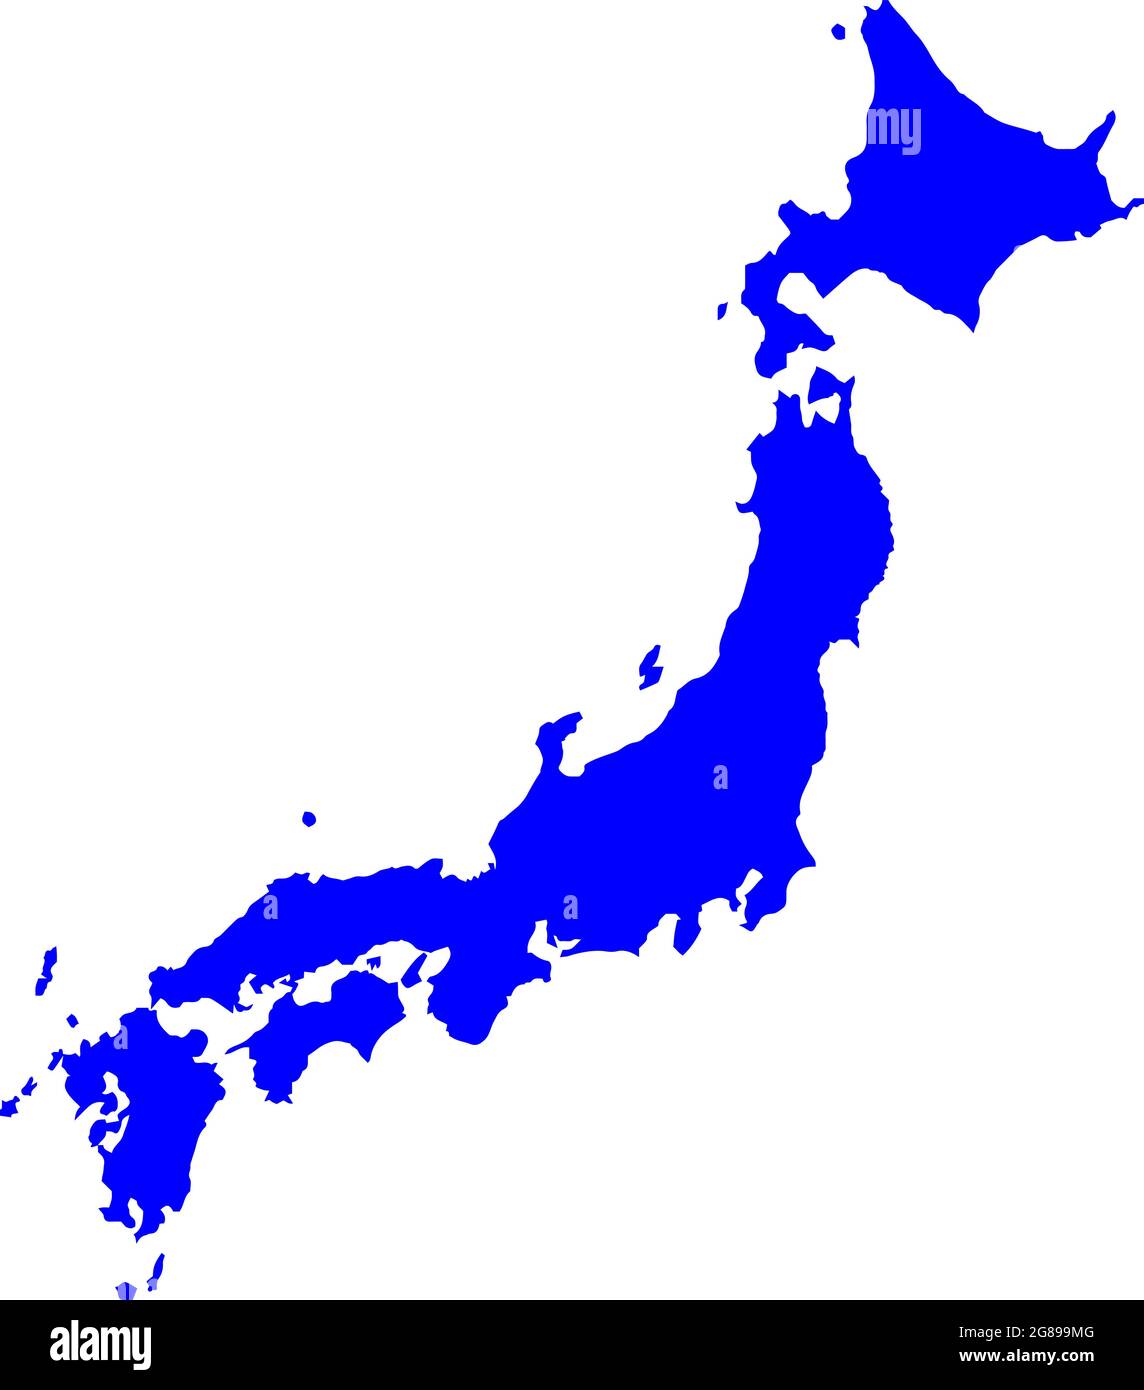 Blue colored Japan outline map. Political japanese map. Vector illustration map. Stock Vector